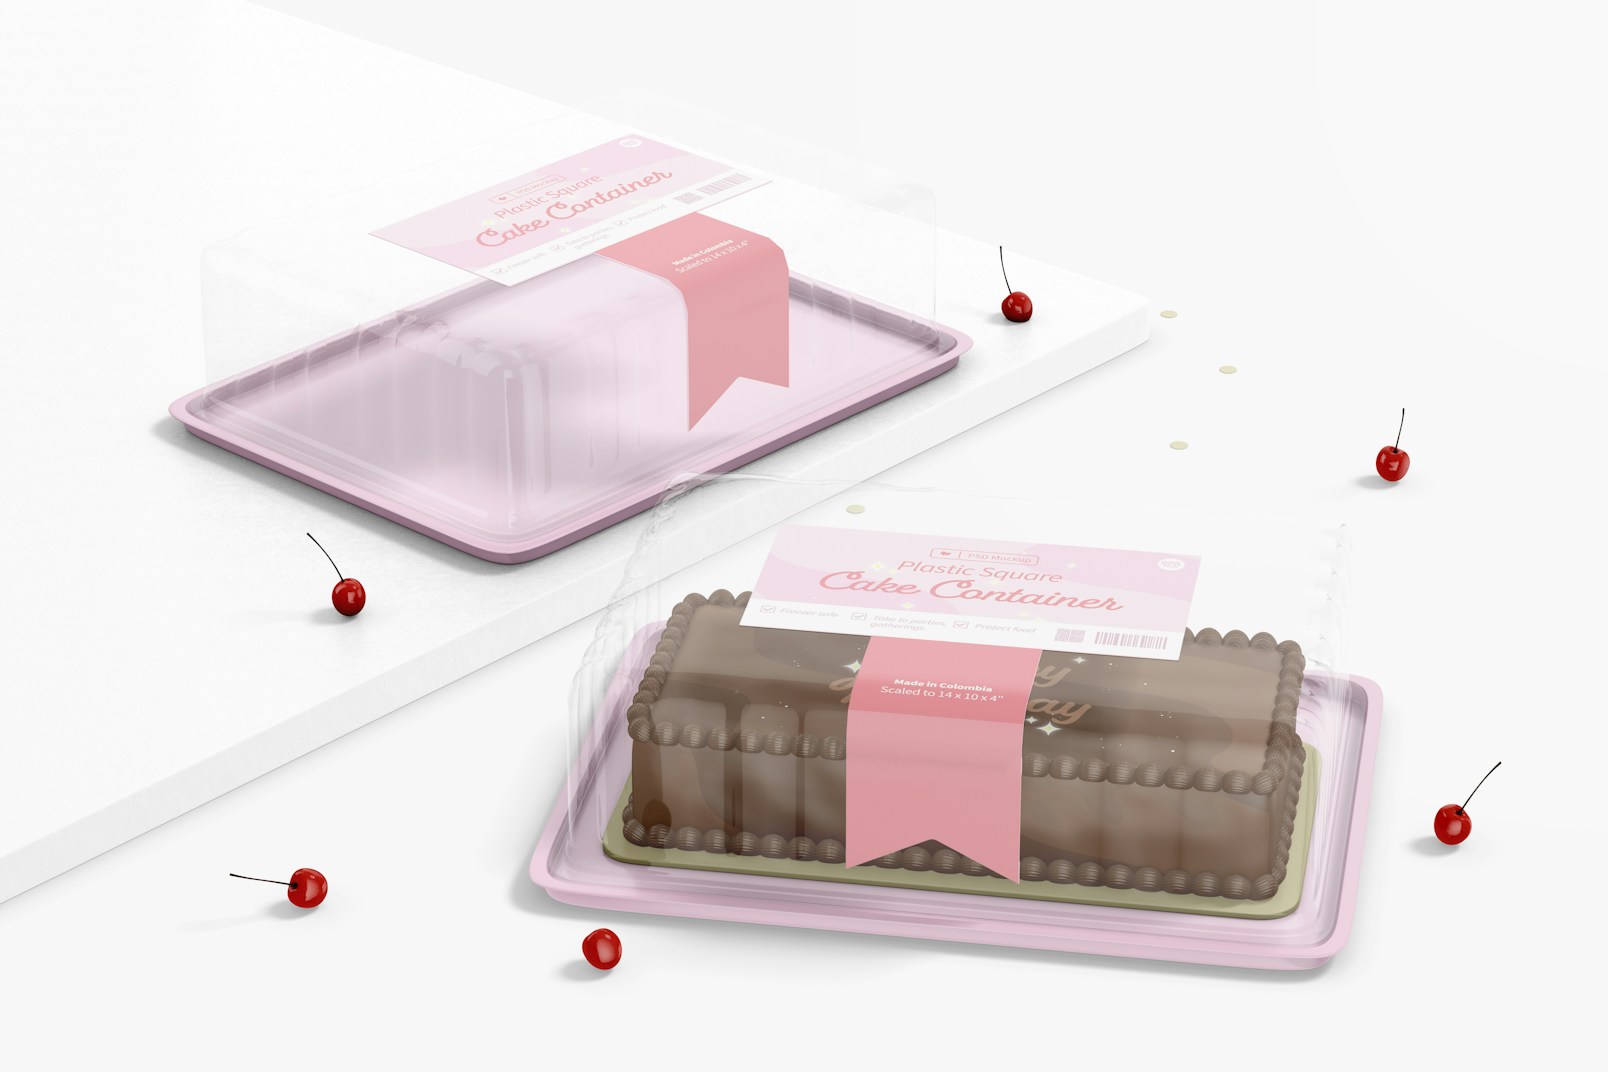 Plastic Square Cake Containers Mockup